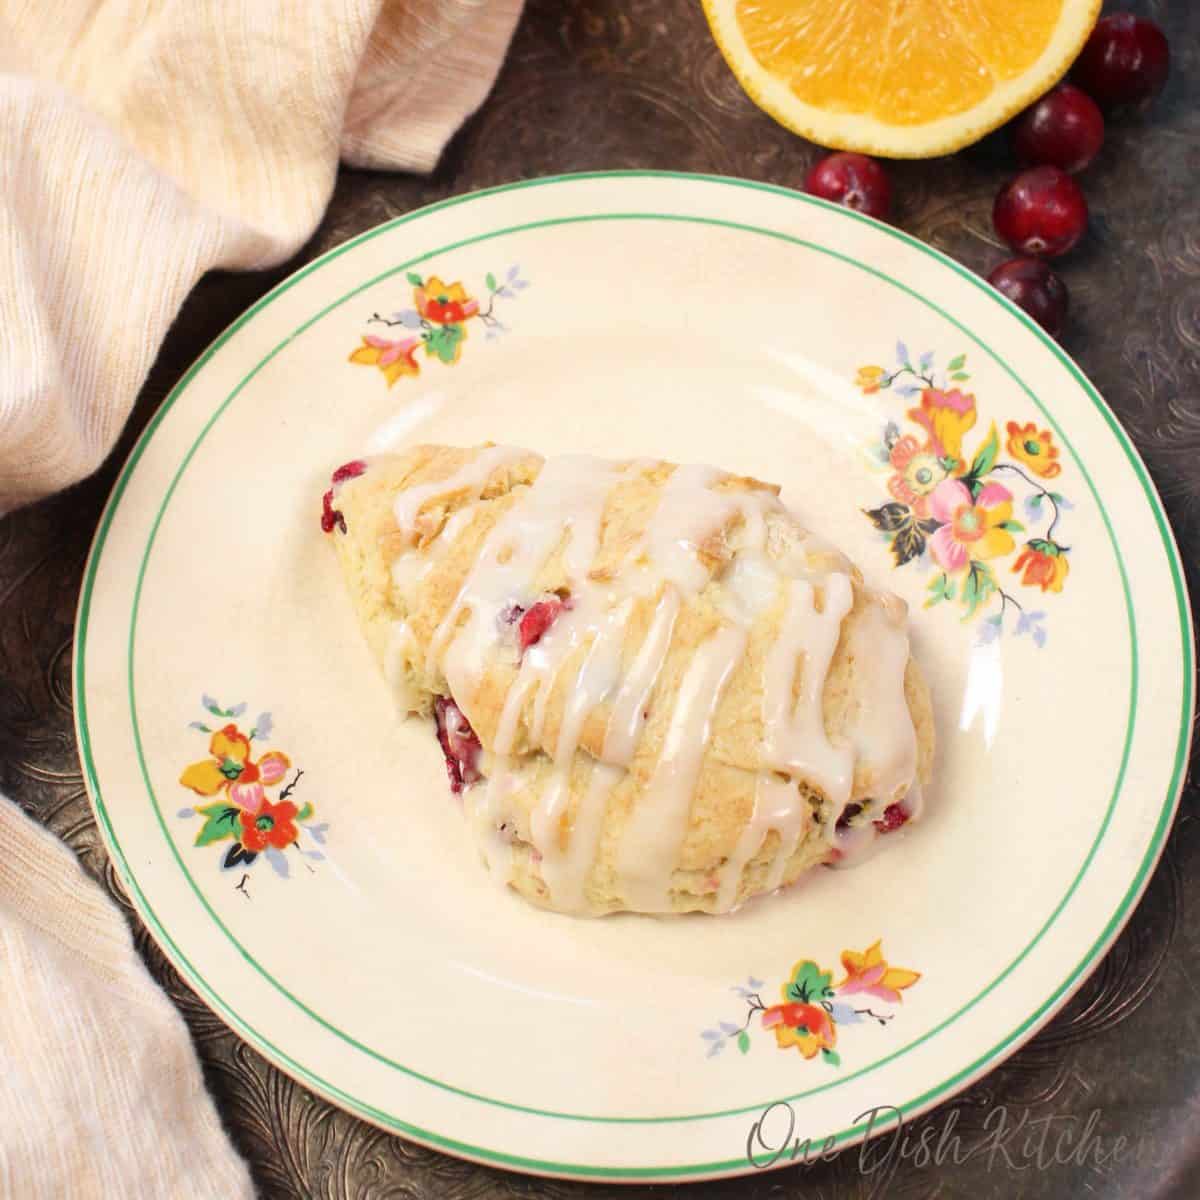 one scone on a flowered plate next to fresh cranberries scattered around a silver tray.